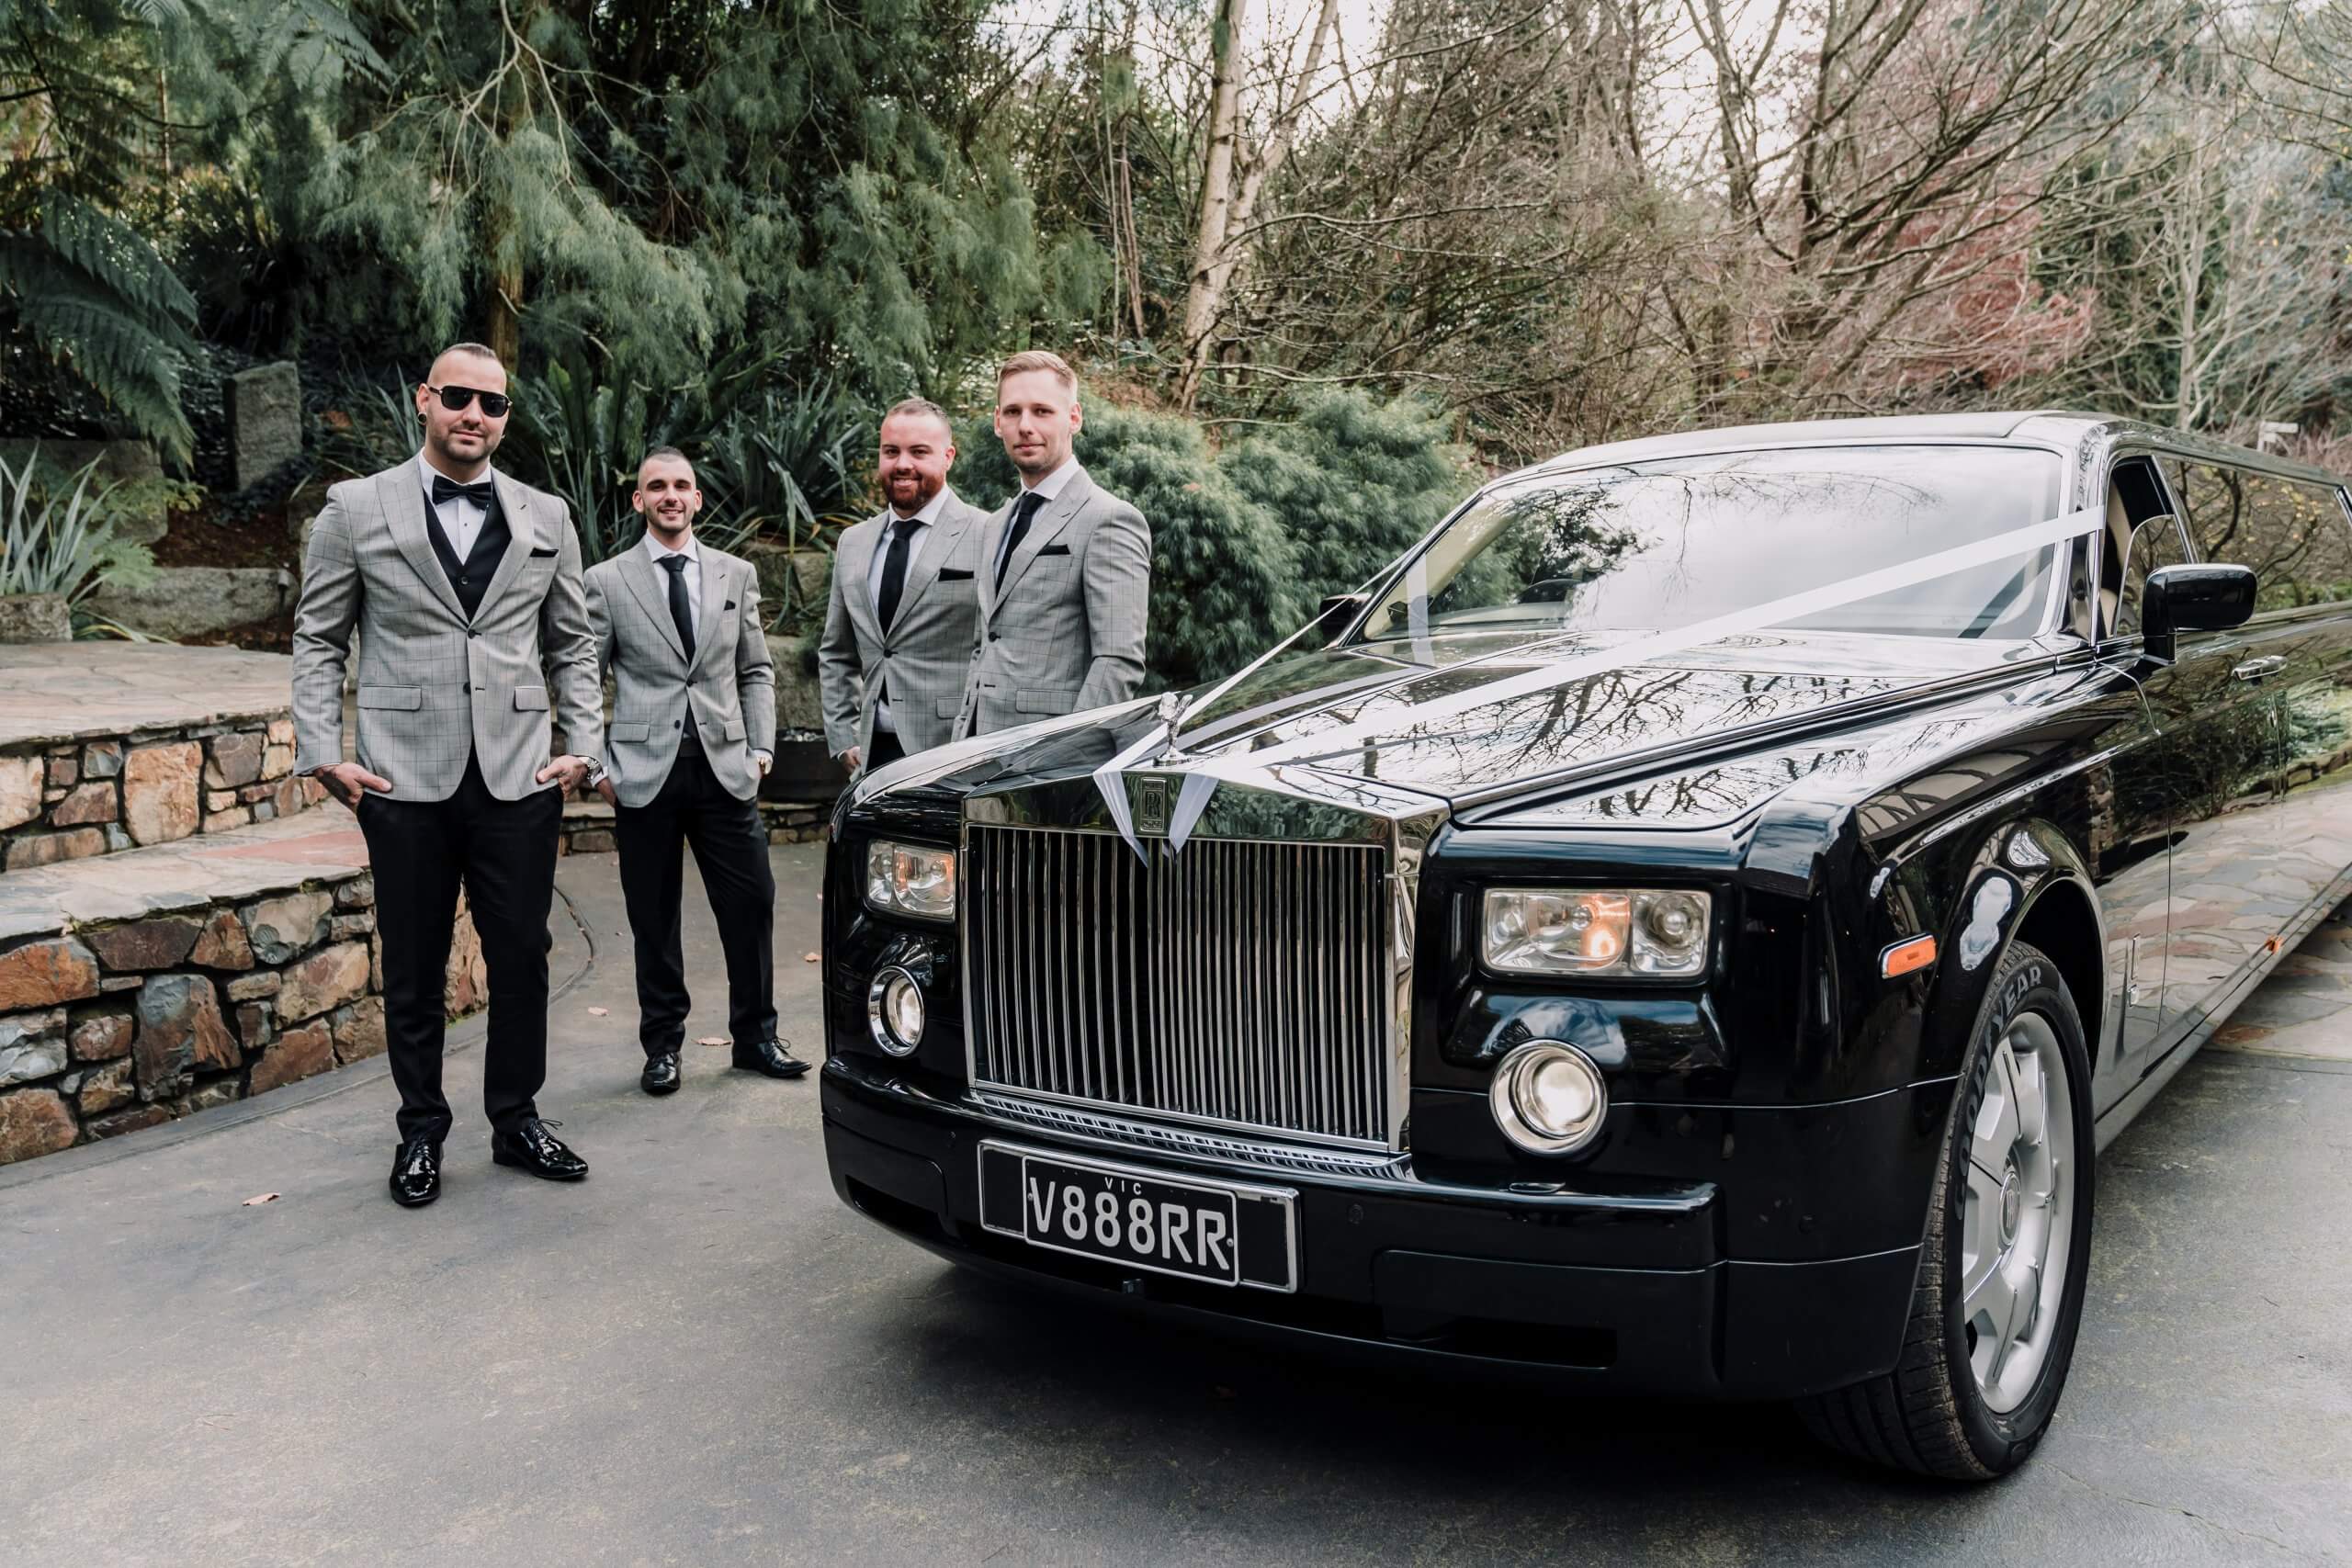 Groomsquad looking dashing beside the black limousine. Captured by Black Avenue Productions